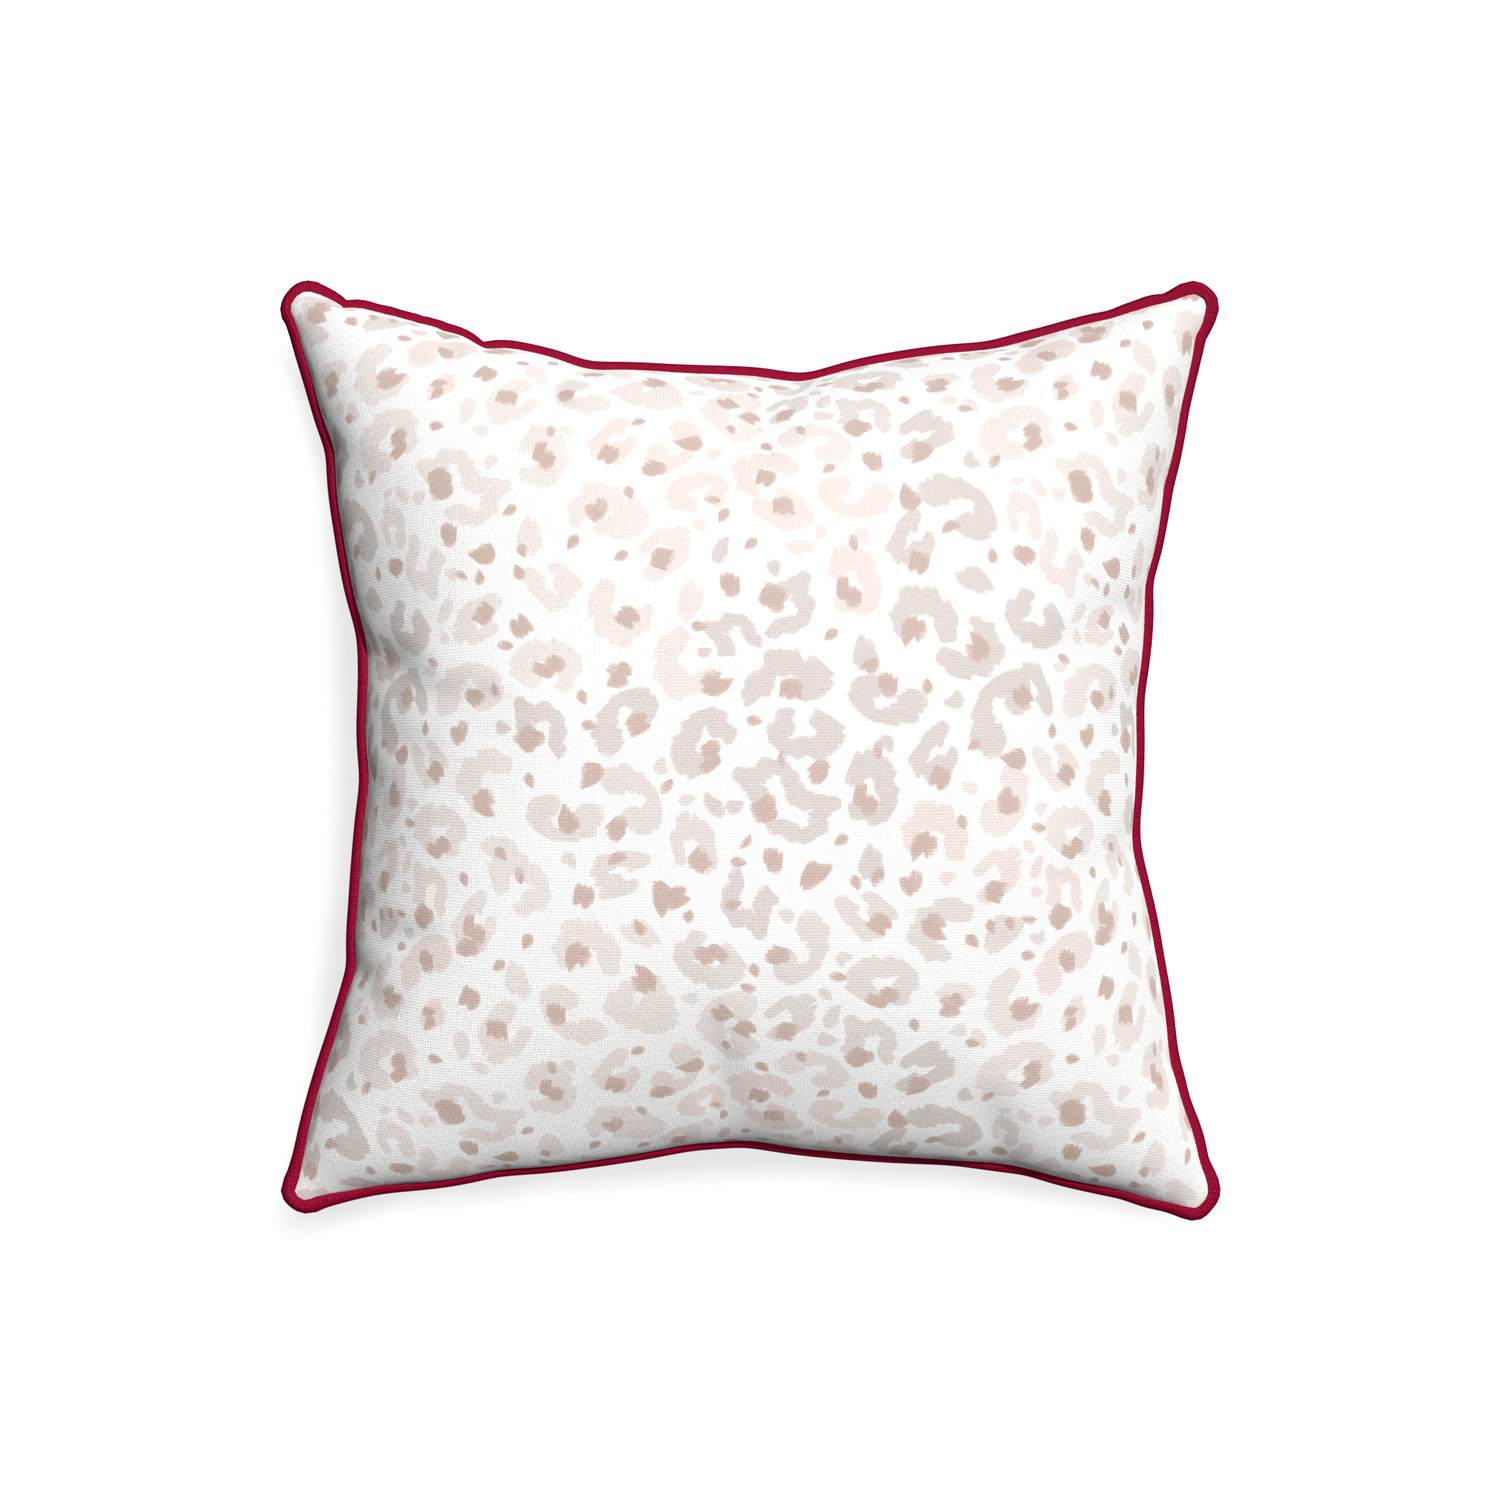 20-square rosie custom pillow with raspberry piping on white background